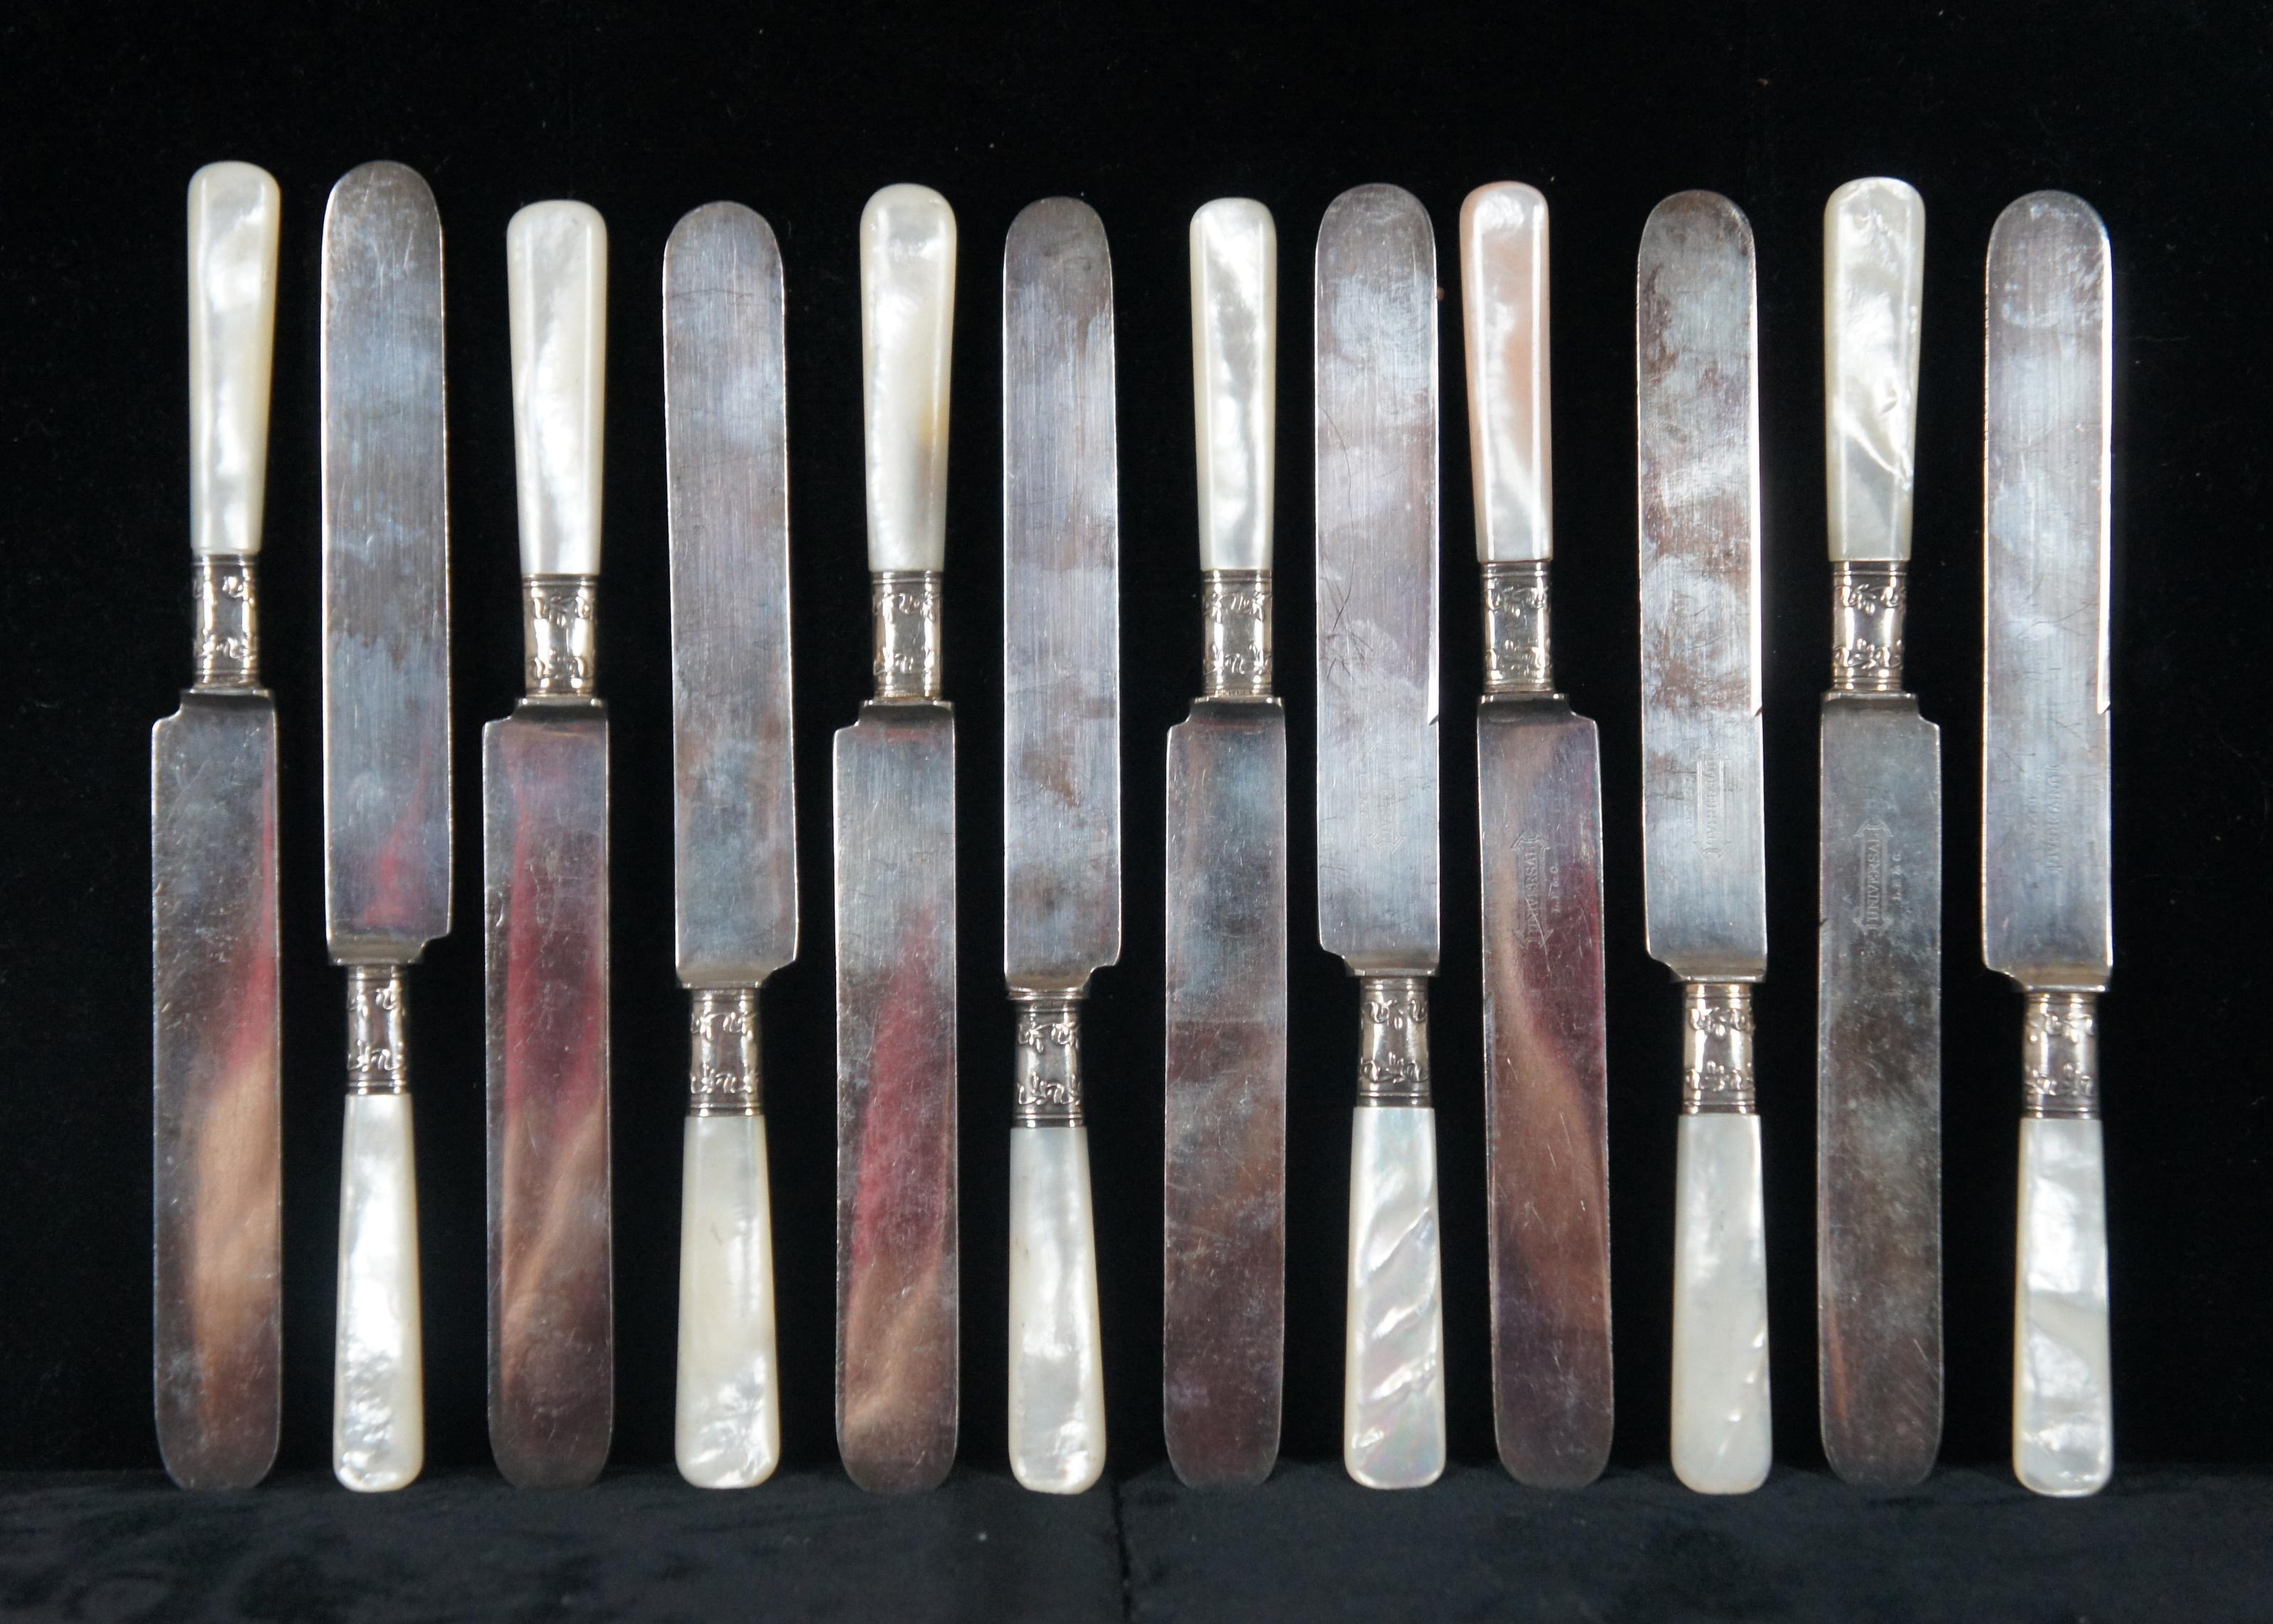 59 Pc Sterling Silver & Mother of Pearl Flatware & Chest Landers Frary & Clark 1